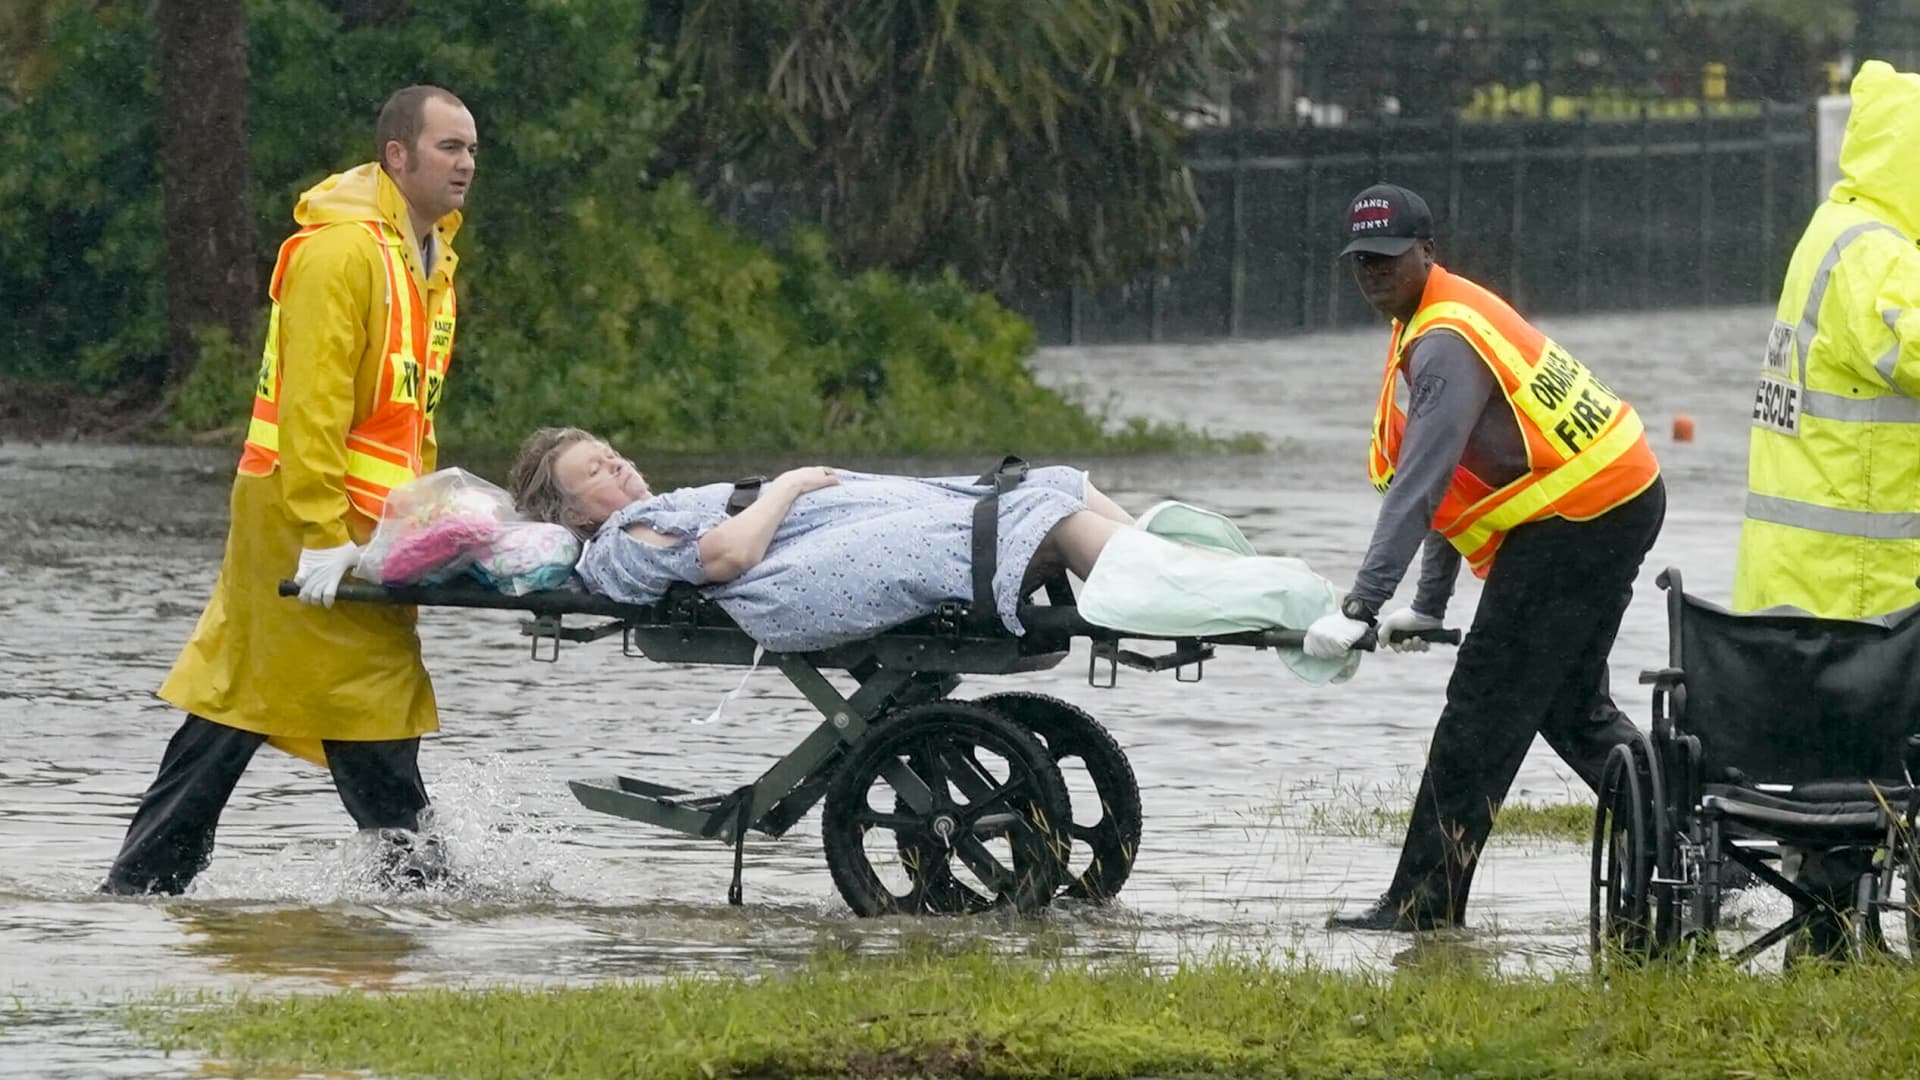 Authorities transport a person out of the Avante nursing home in the aftermath of Hurricane Ian, Thursday, Sept. 29, 2022, in Orlando, Fla.